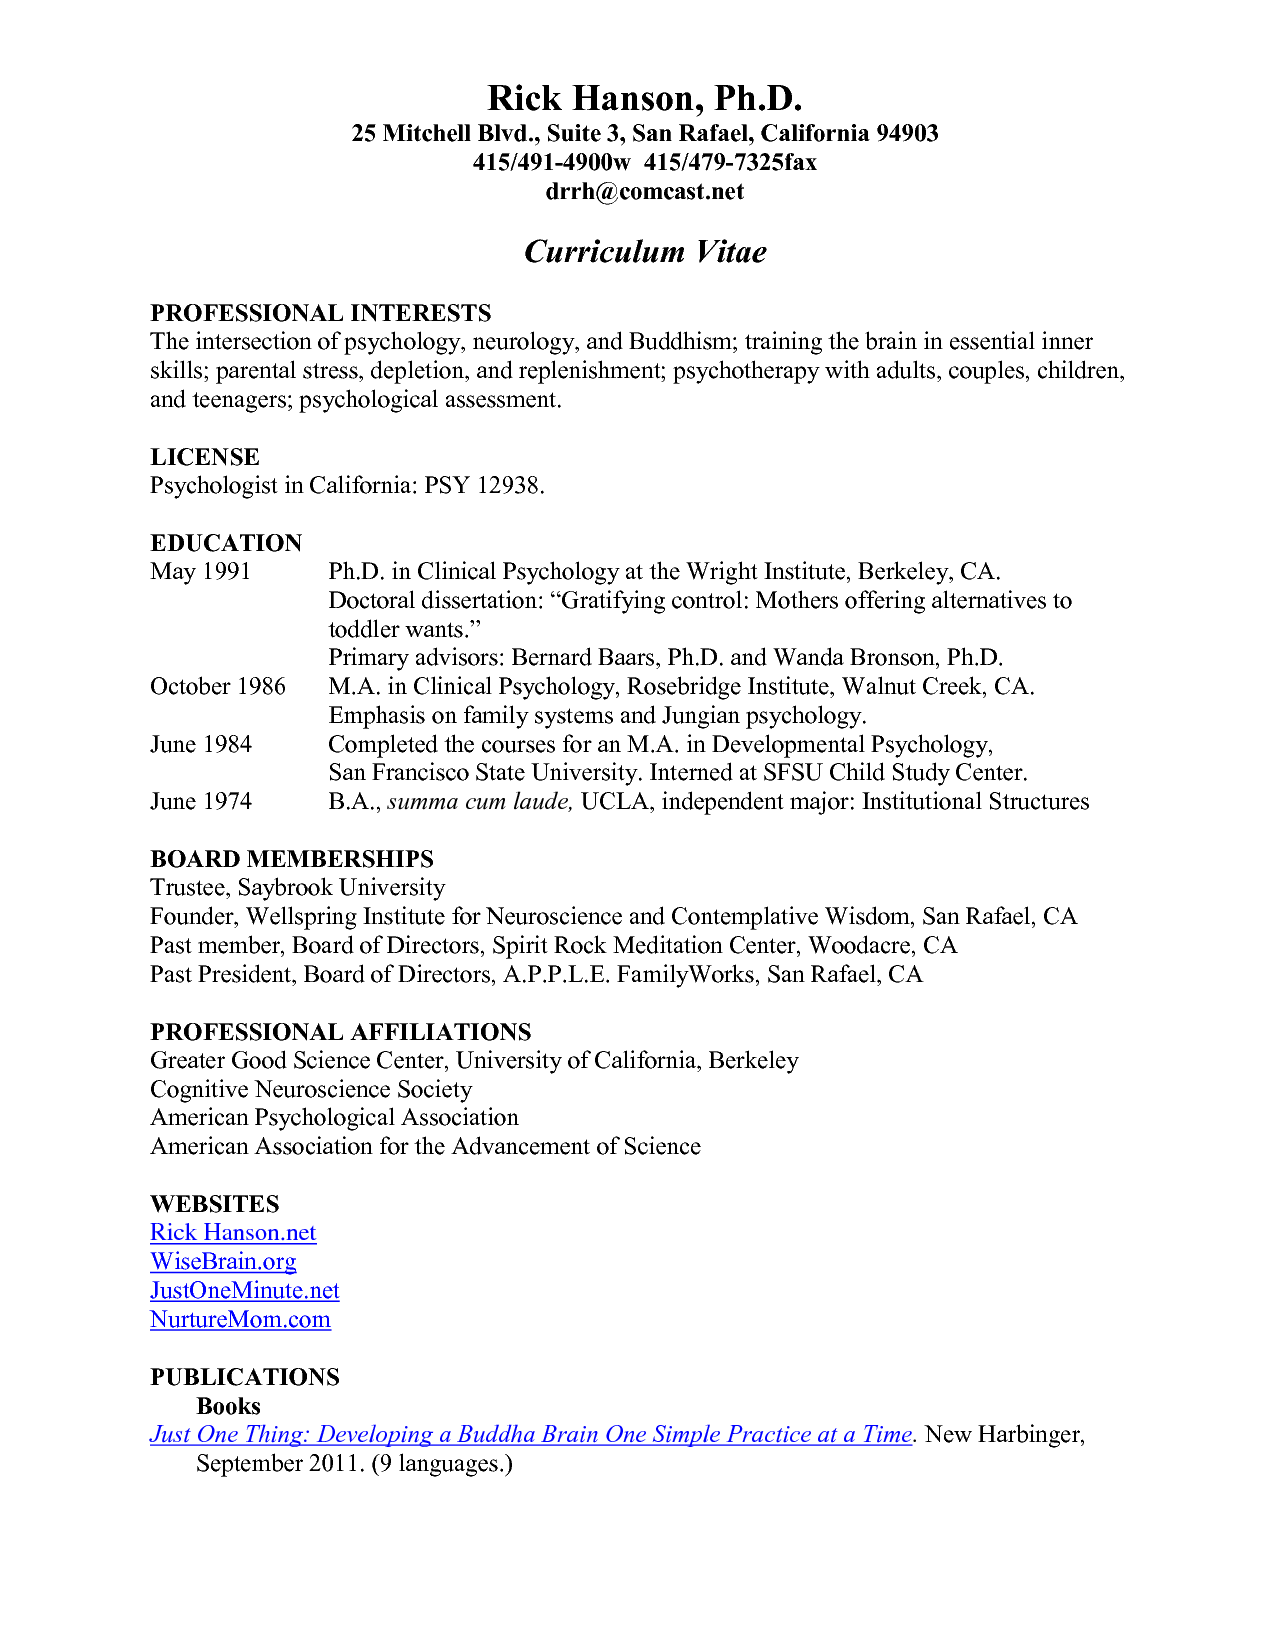 Help with making a great resume